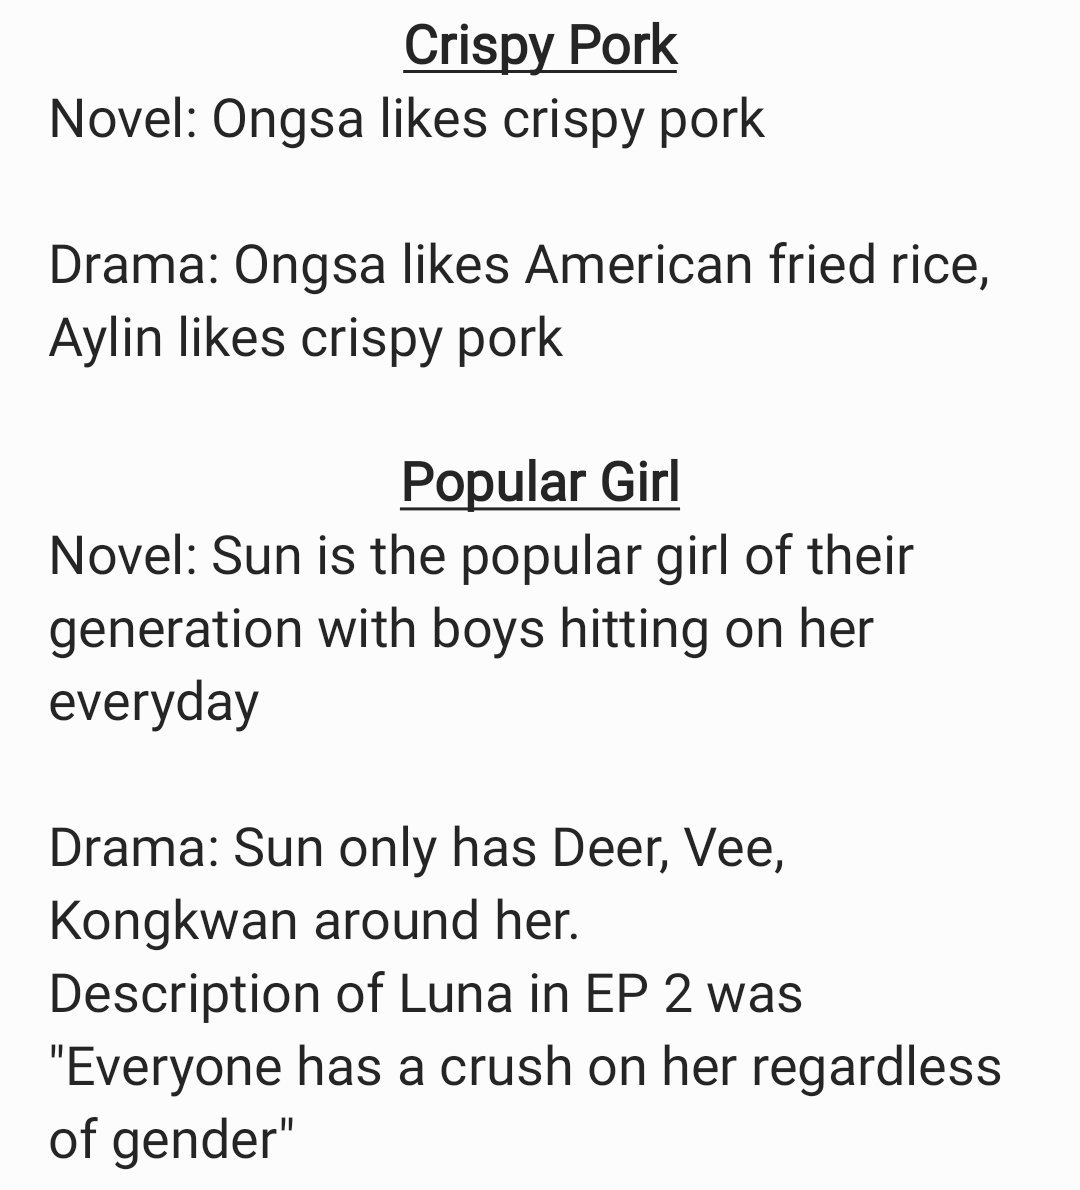 random thoughts...
Why let Aylin and Luna take on some of the characteristics of the novel's Ongsa and Sun?

Can't OngsaSun retain their personalities from the novel, and AylinLuna be given their own unique personalities?

#23point5